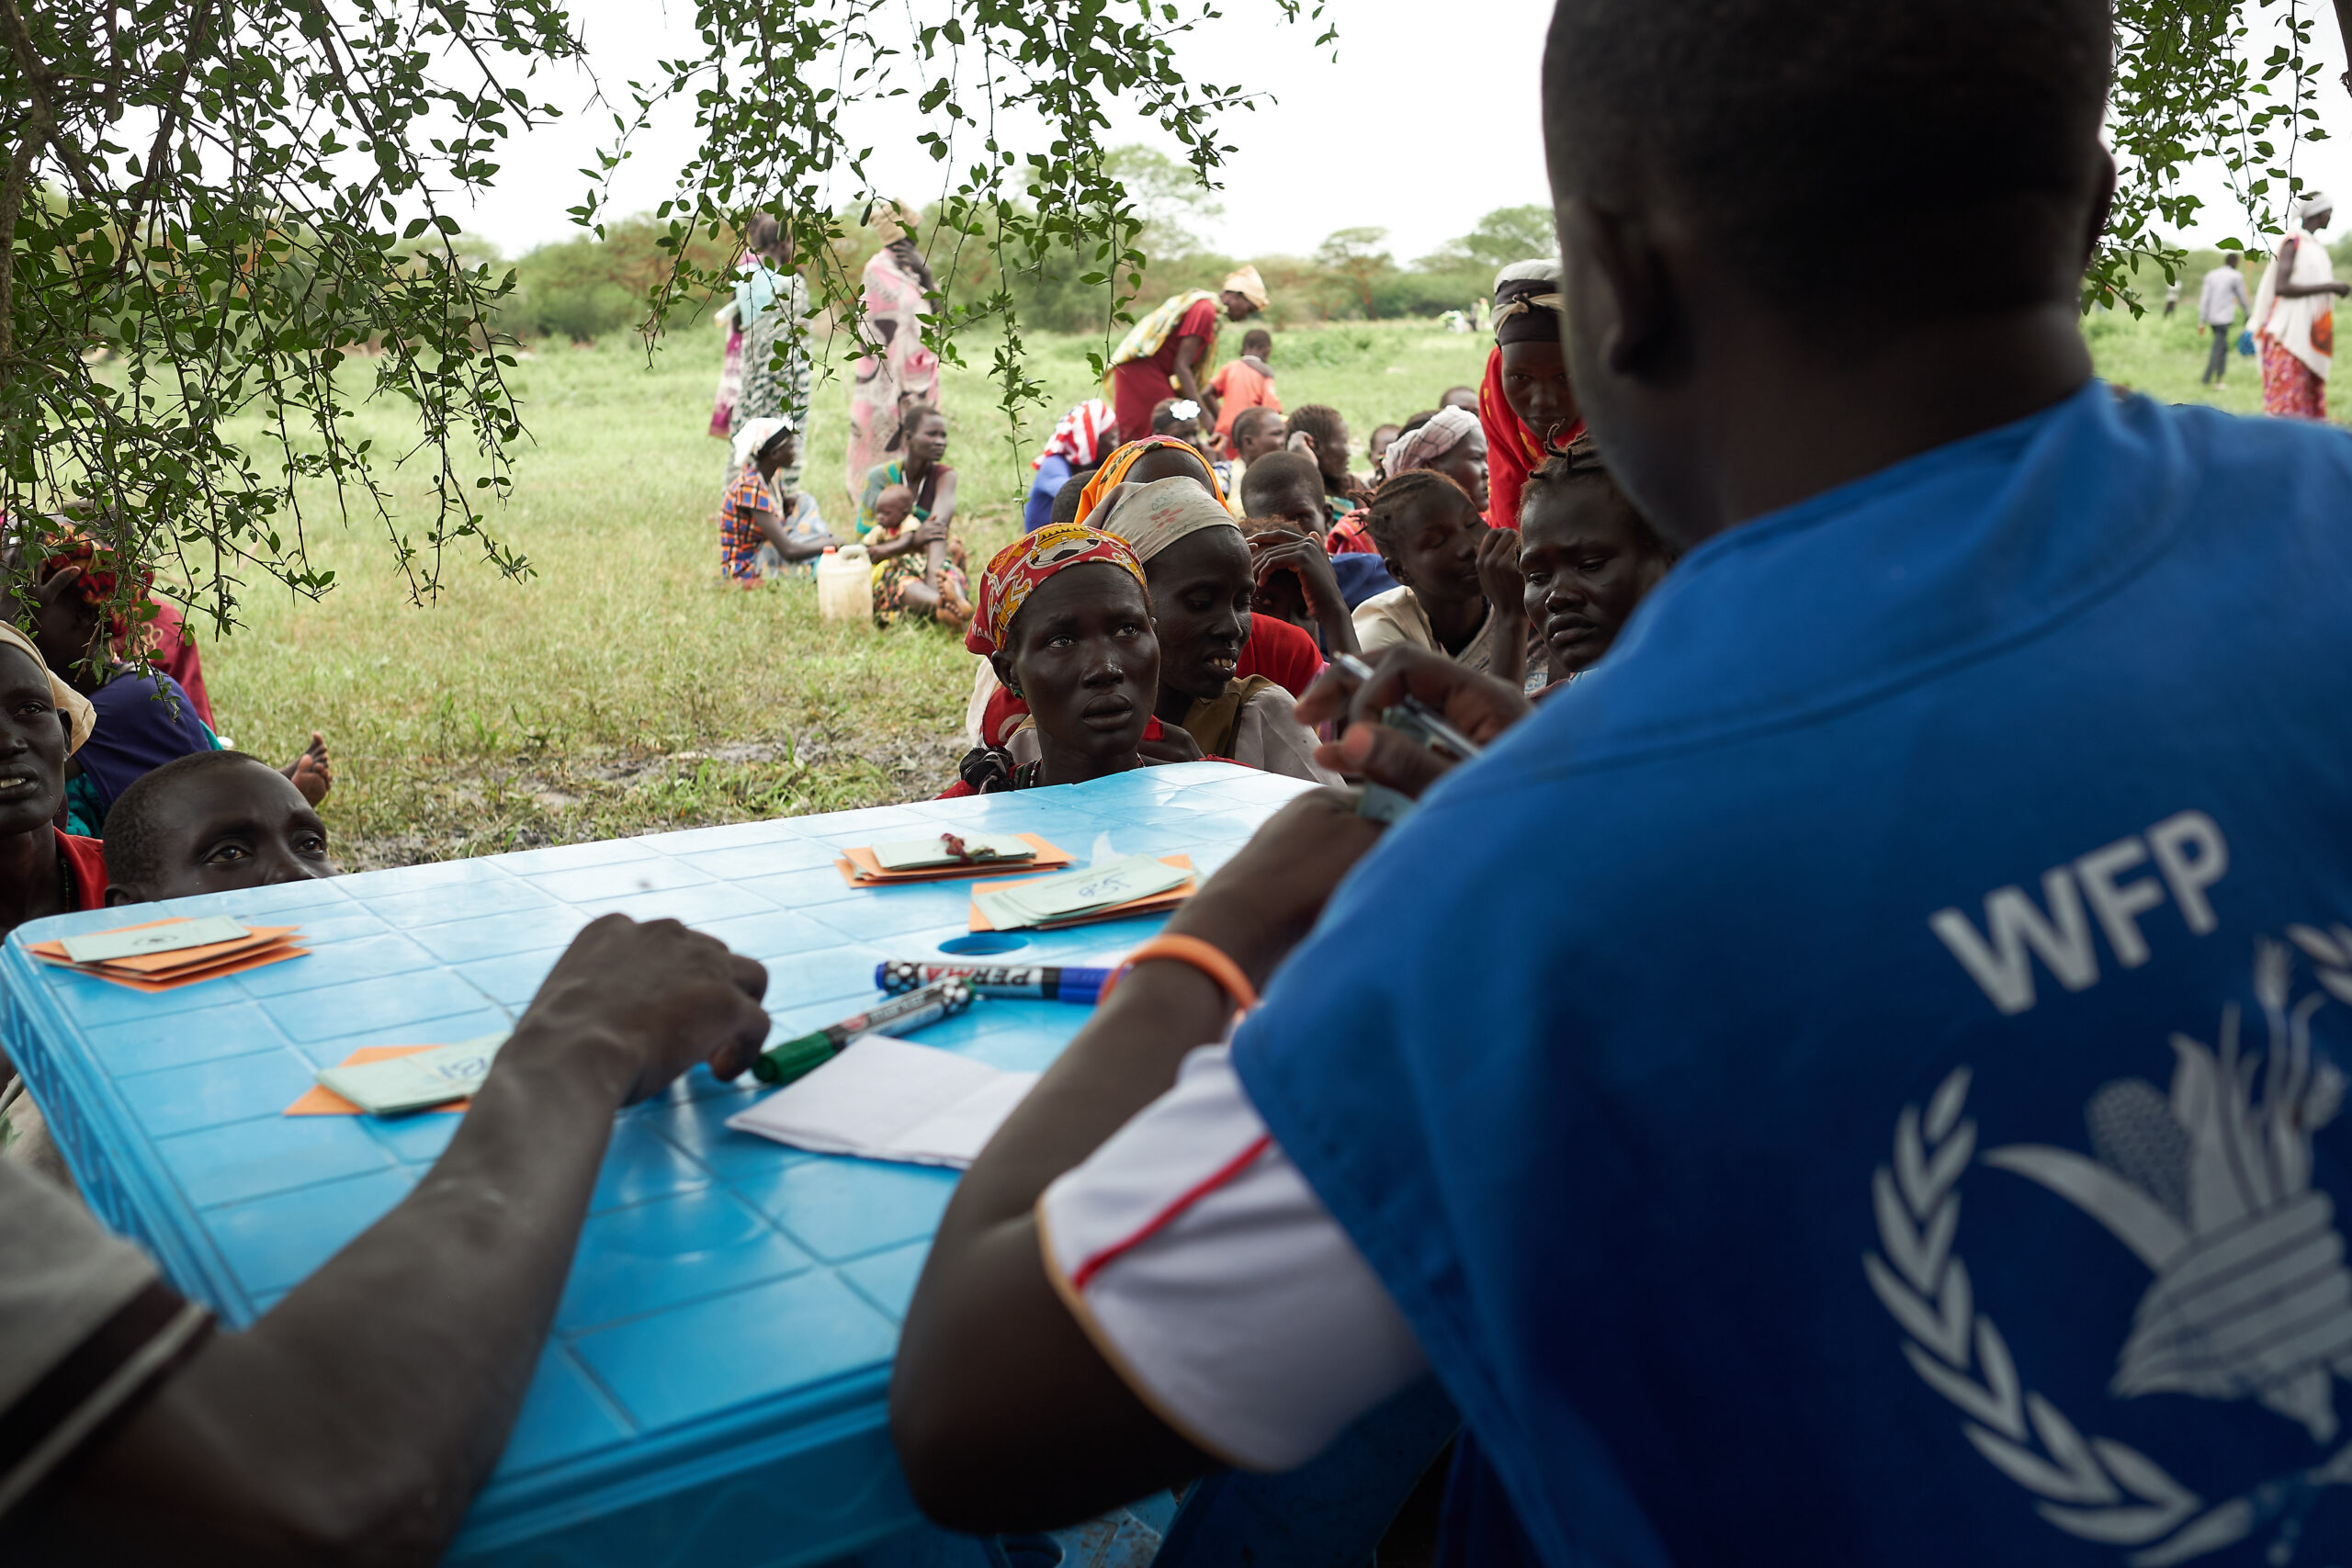 WFP helps provide emergency food relief for families in South Sudan